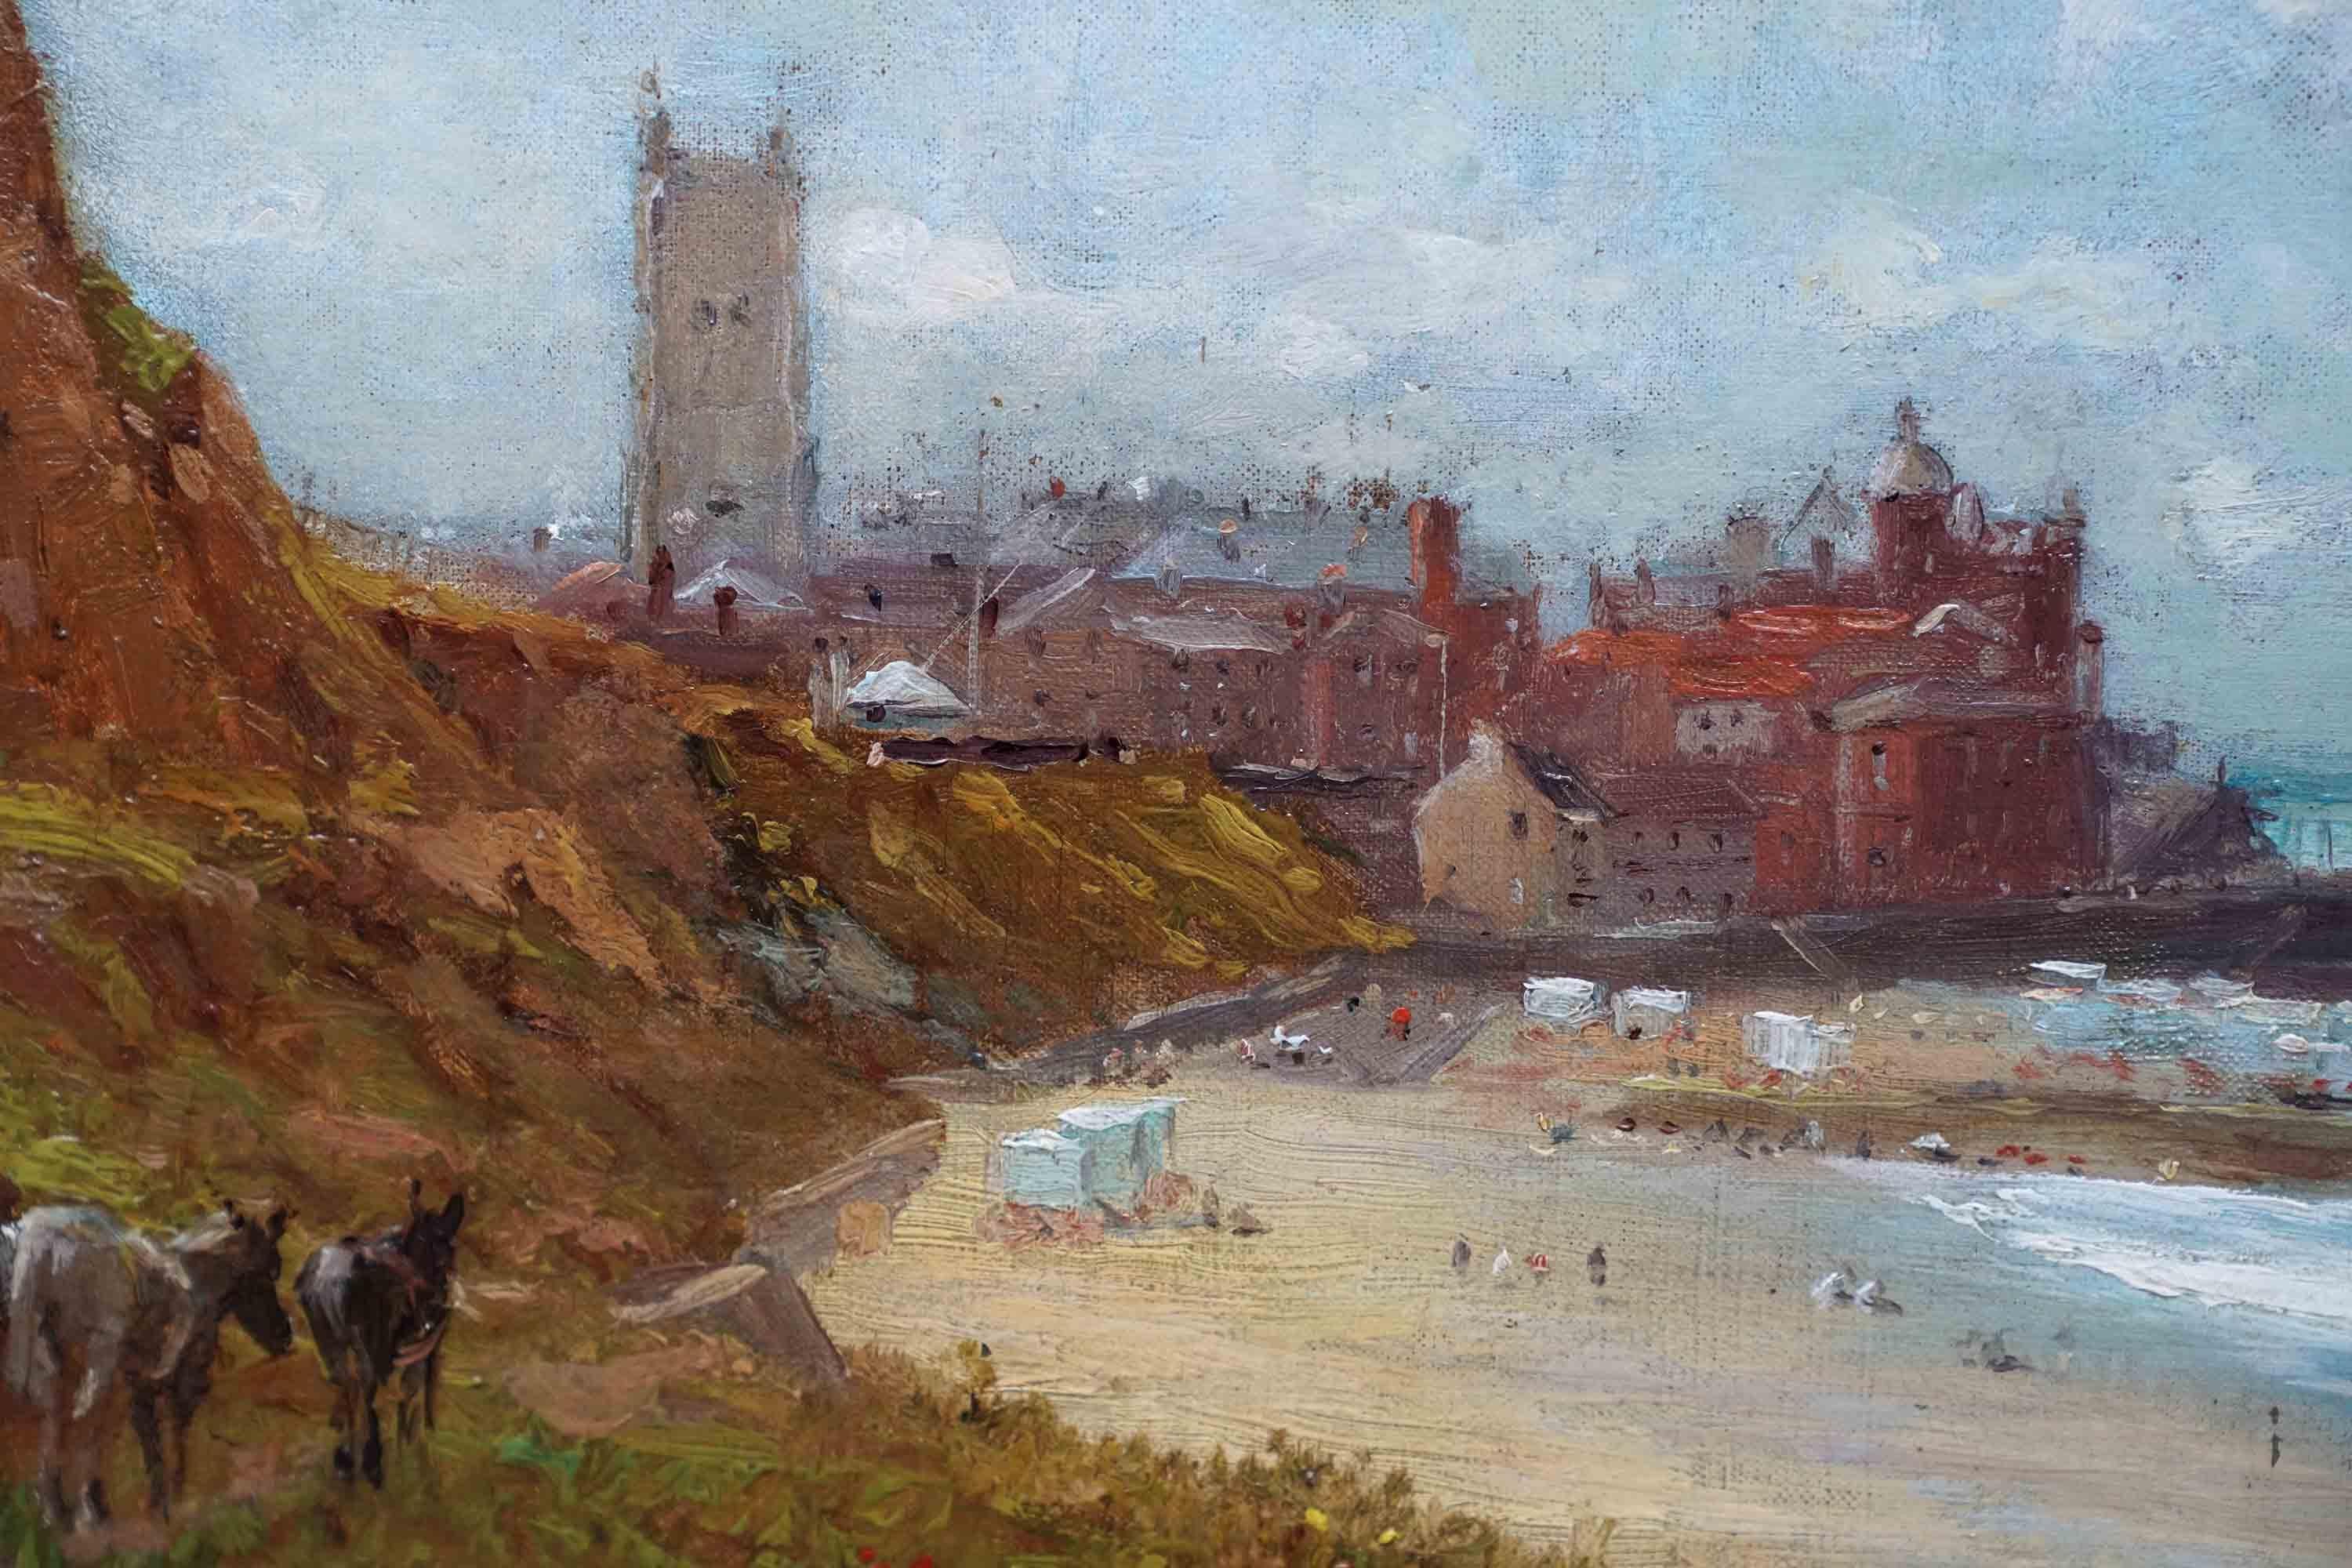 Cromer Coastal Landscape with Donkeys - British 19th century art oil painting For Sale 1